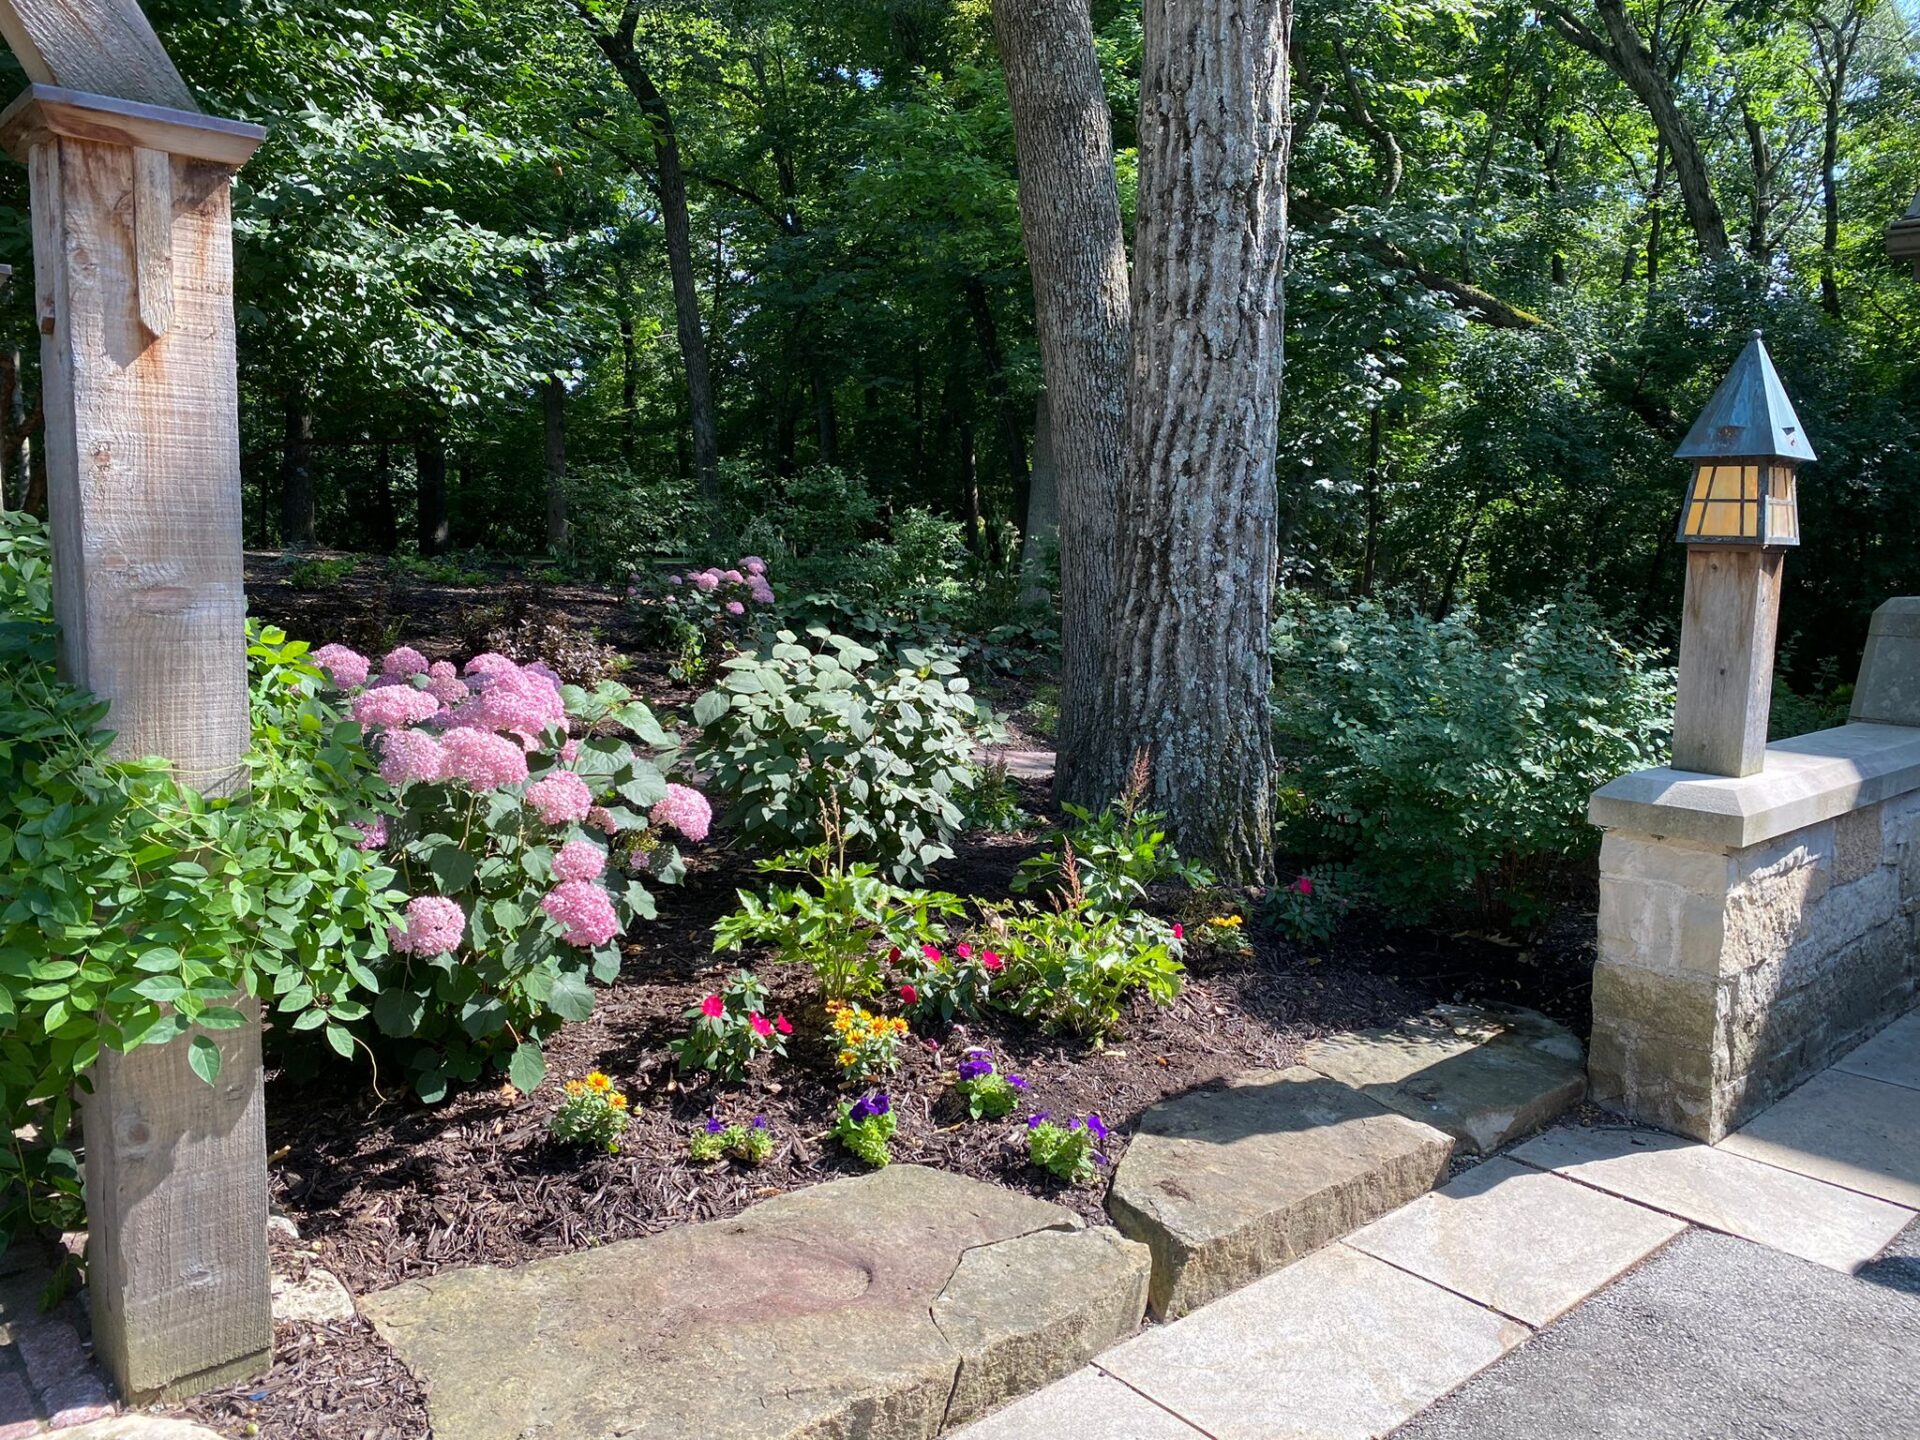 A peaceful garden with pink hydrangeas, assorted flowers, trees, a stepping stone path, and wooden and stone pillars with a lantern.